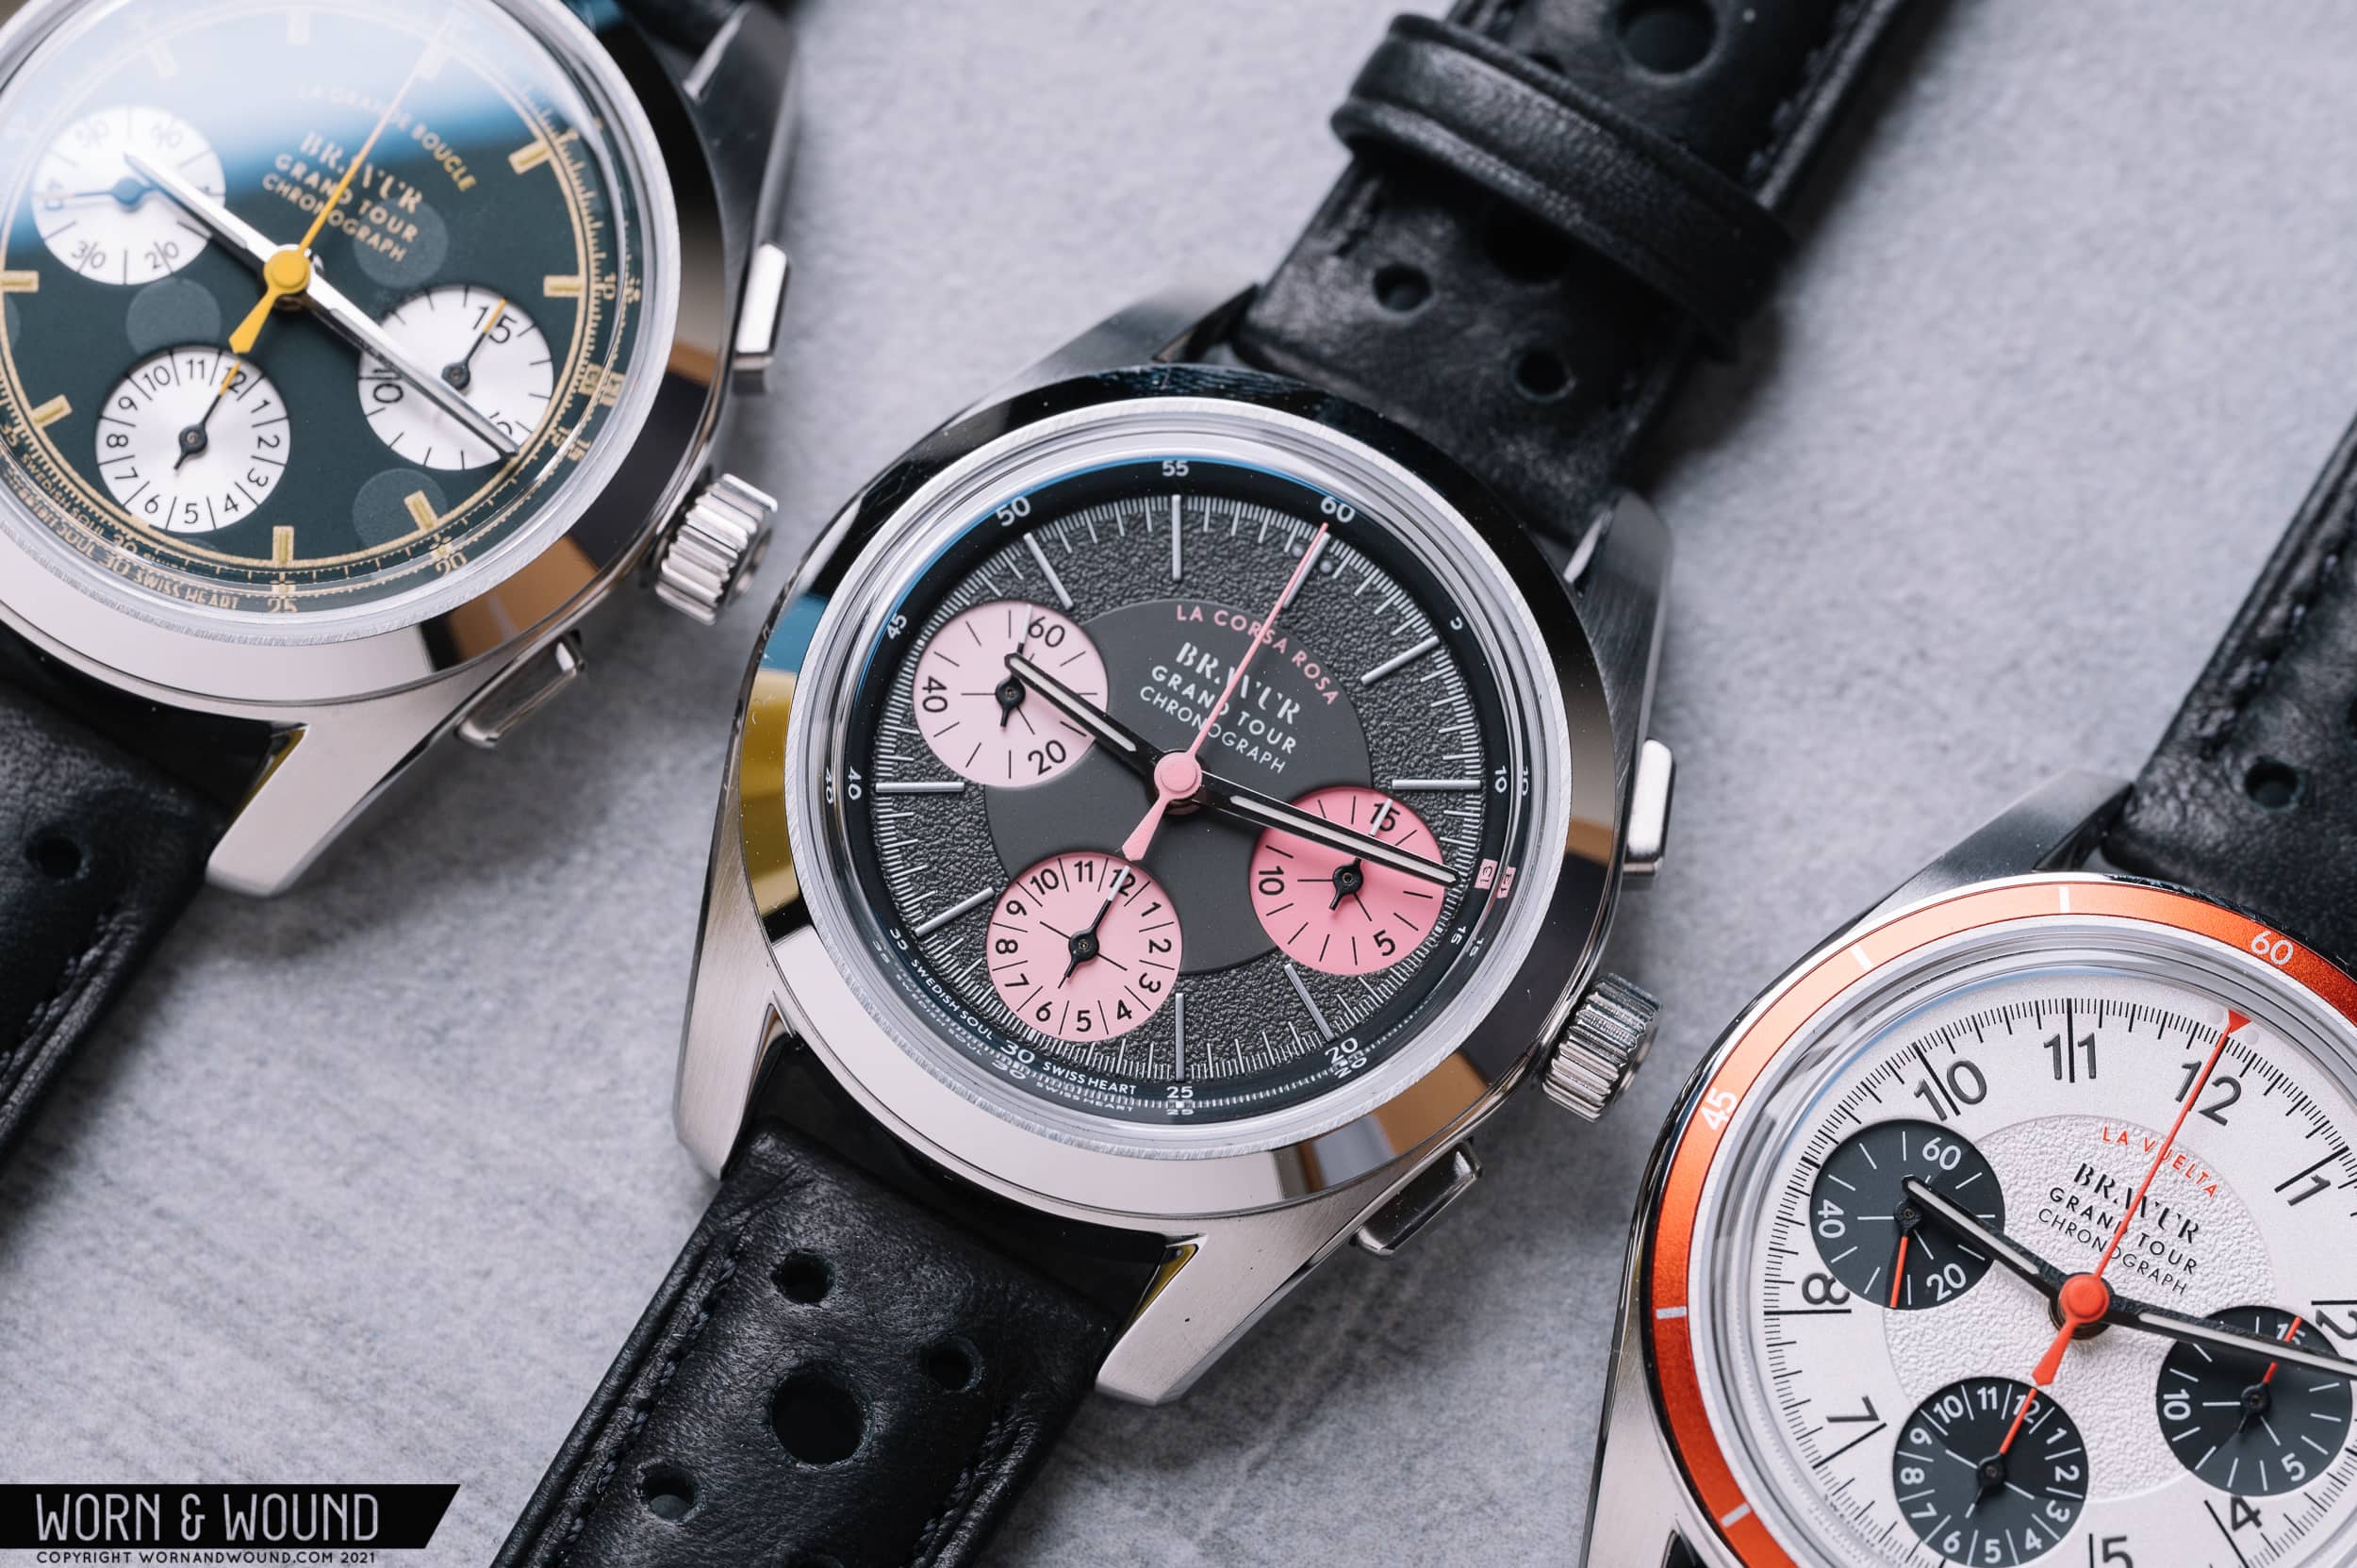 Hands-On With the Bravur Grand Tour Chronographs - Worn & Wound